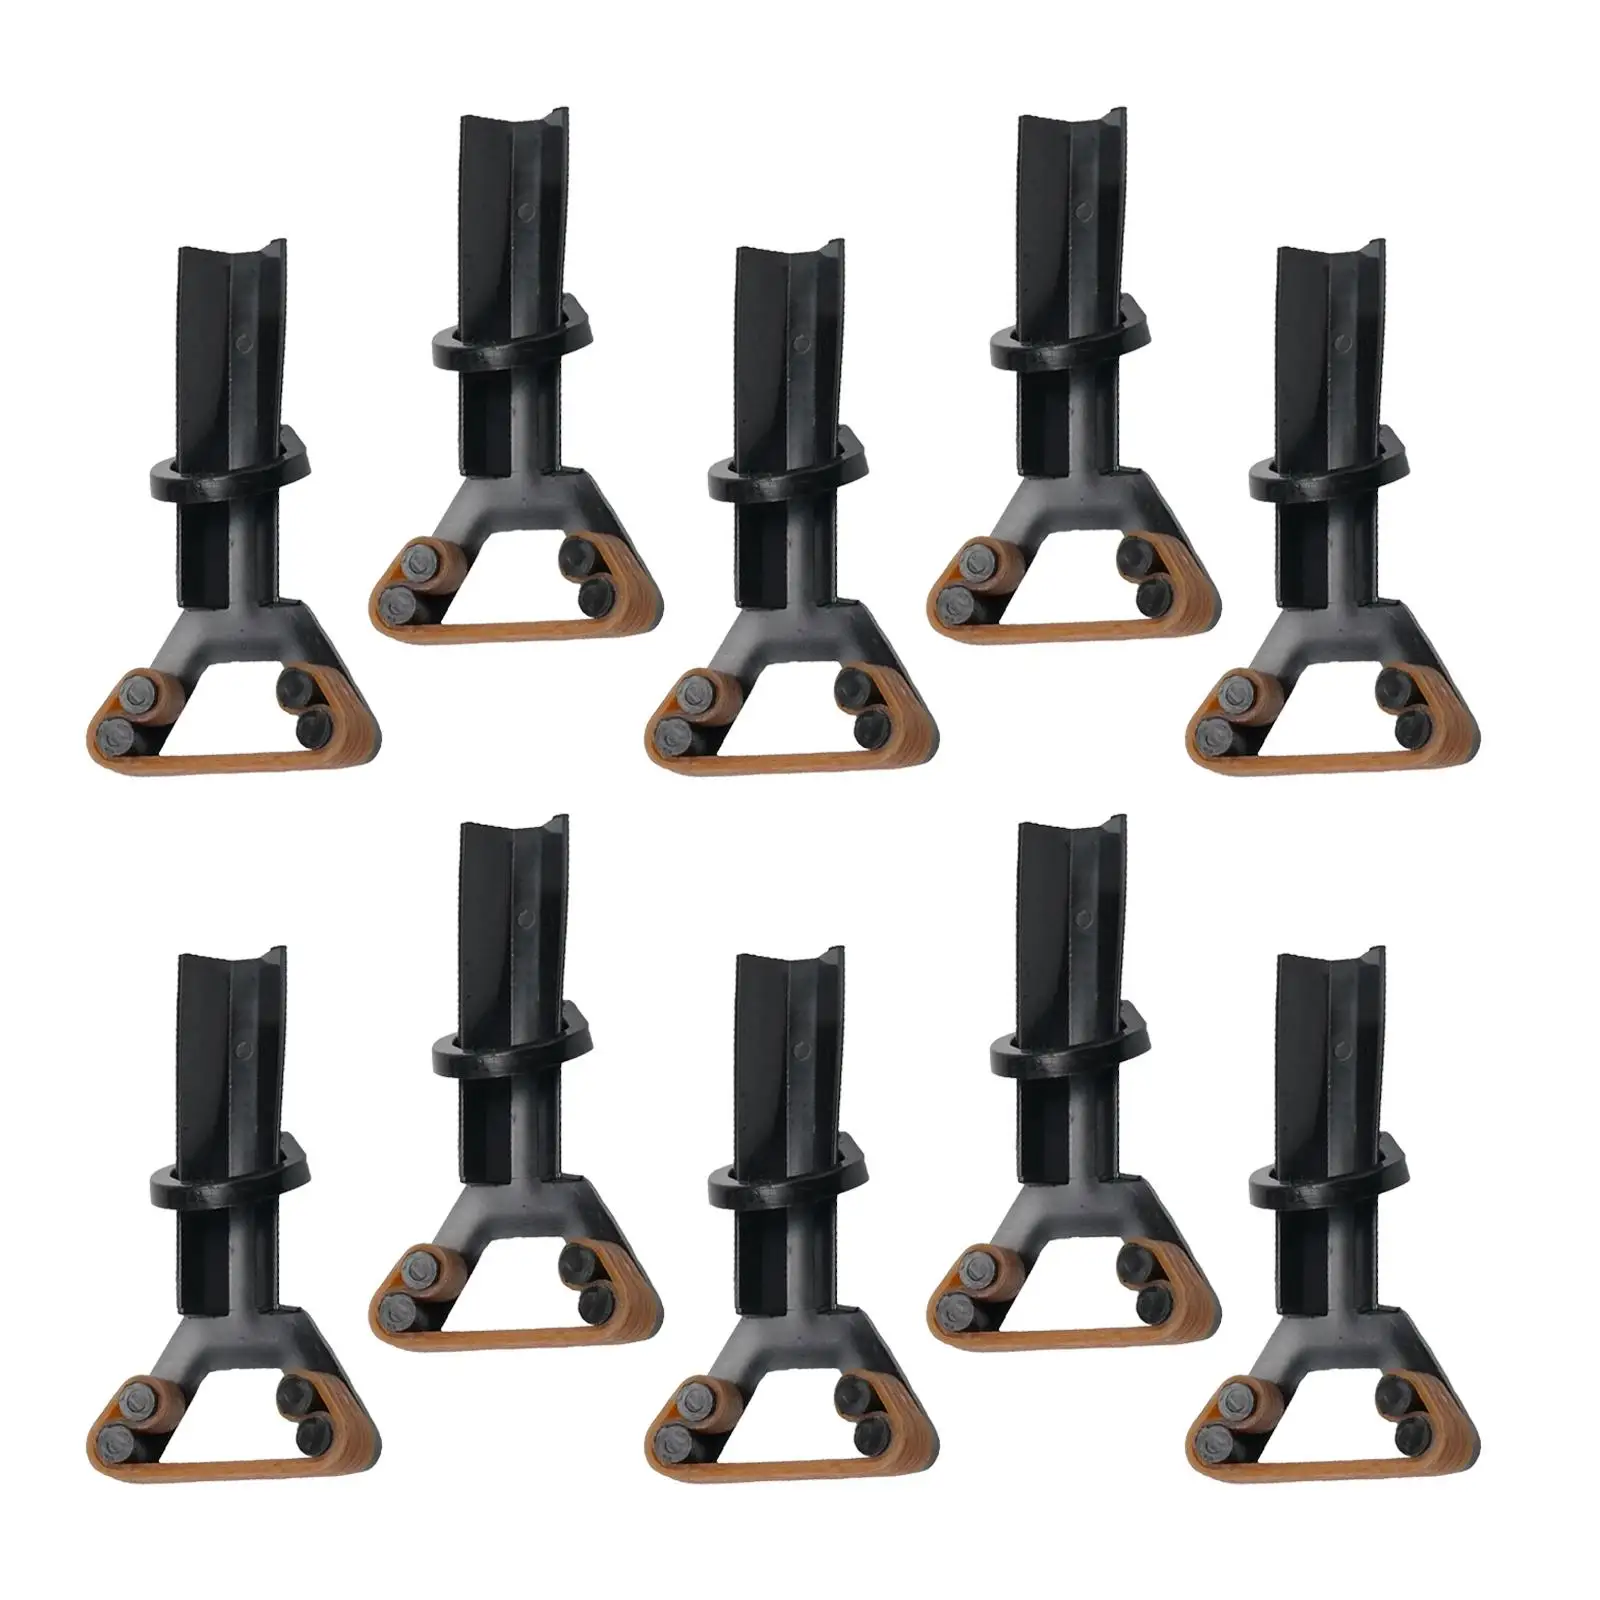 10x Pool Cue Tip Clamp Y Shaped Billiard Cue Tip Clamp for Games Home Indoor